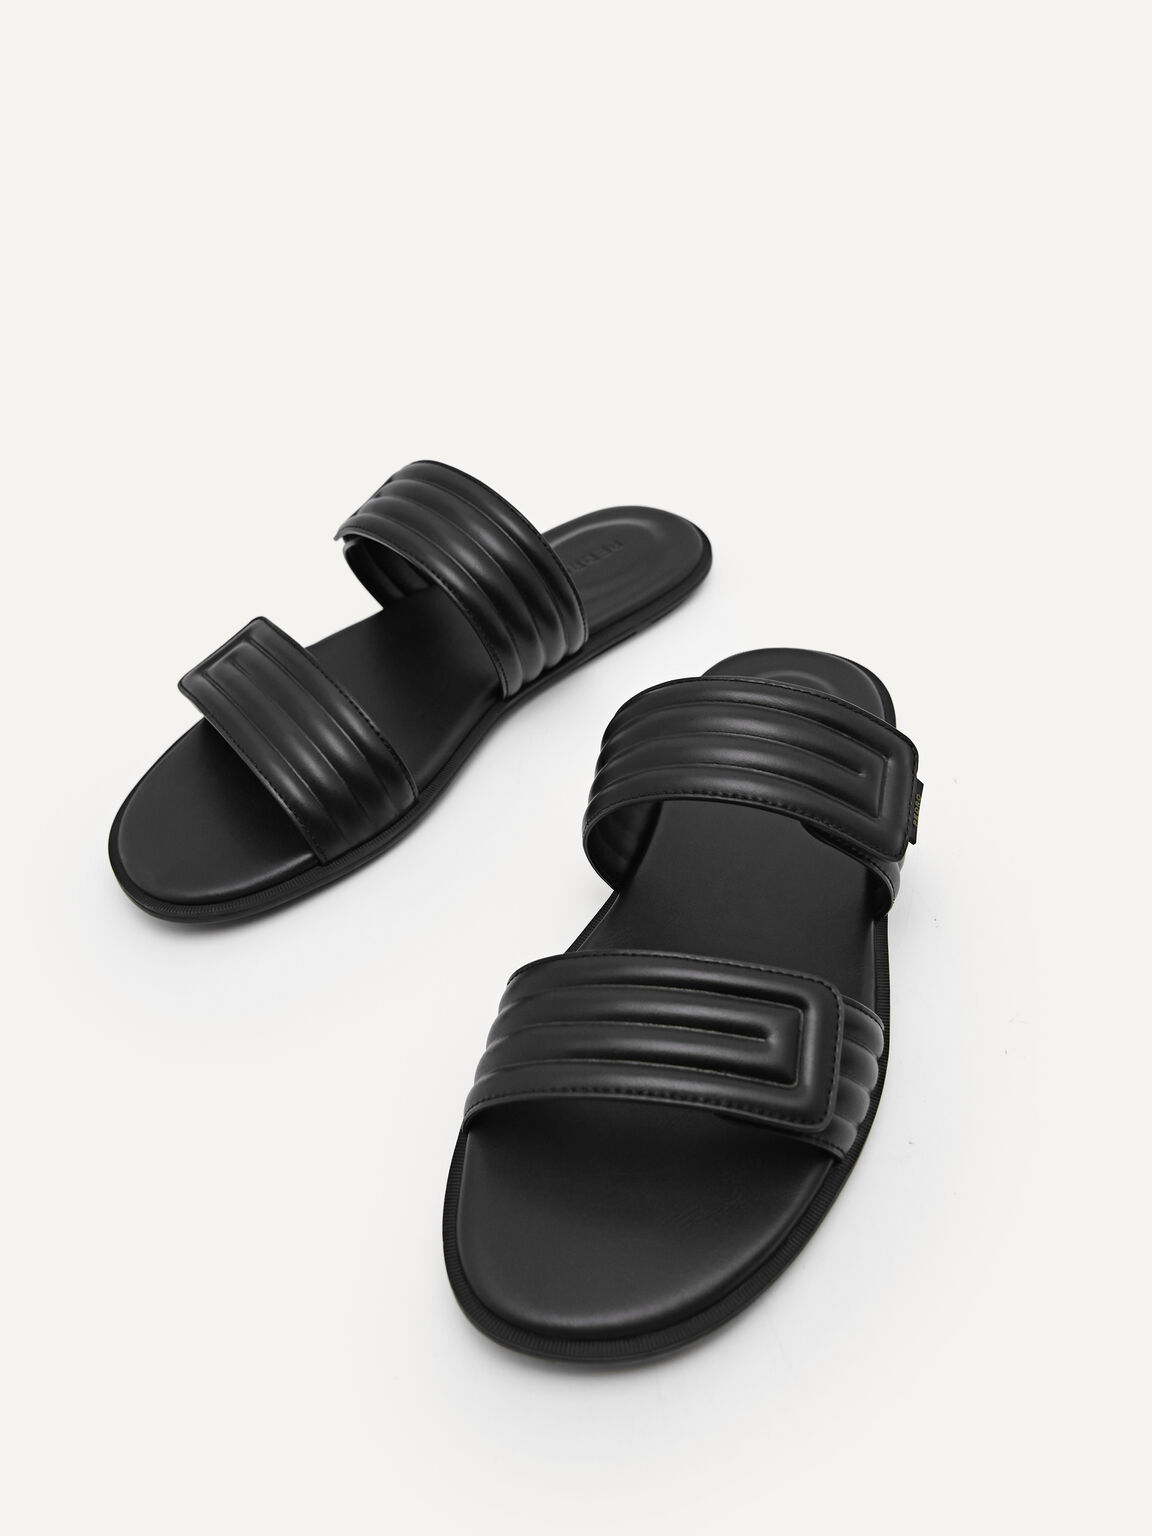 Quilted Double Strap Slide Sandals, Black